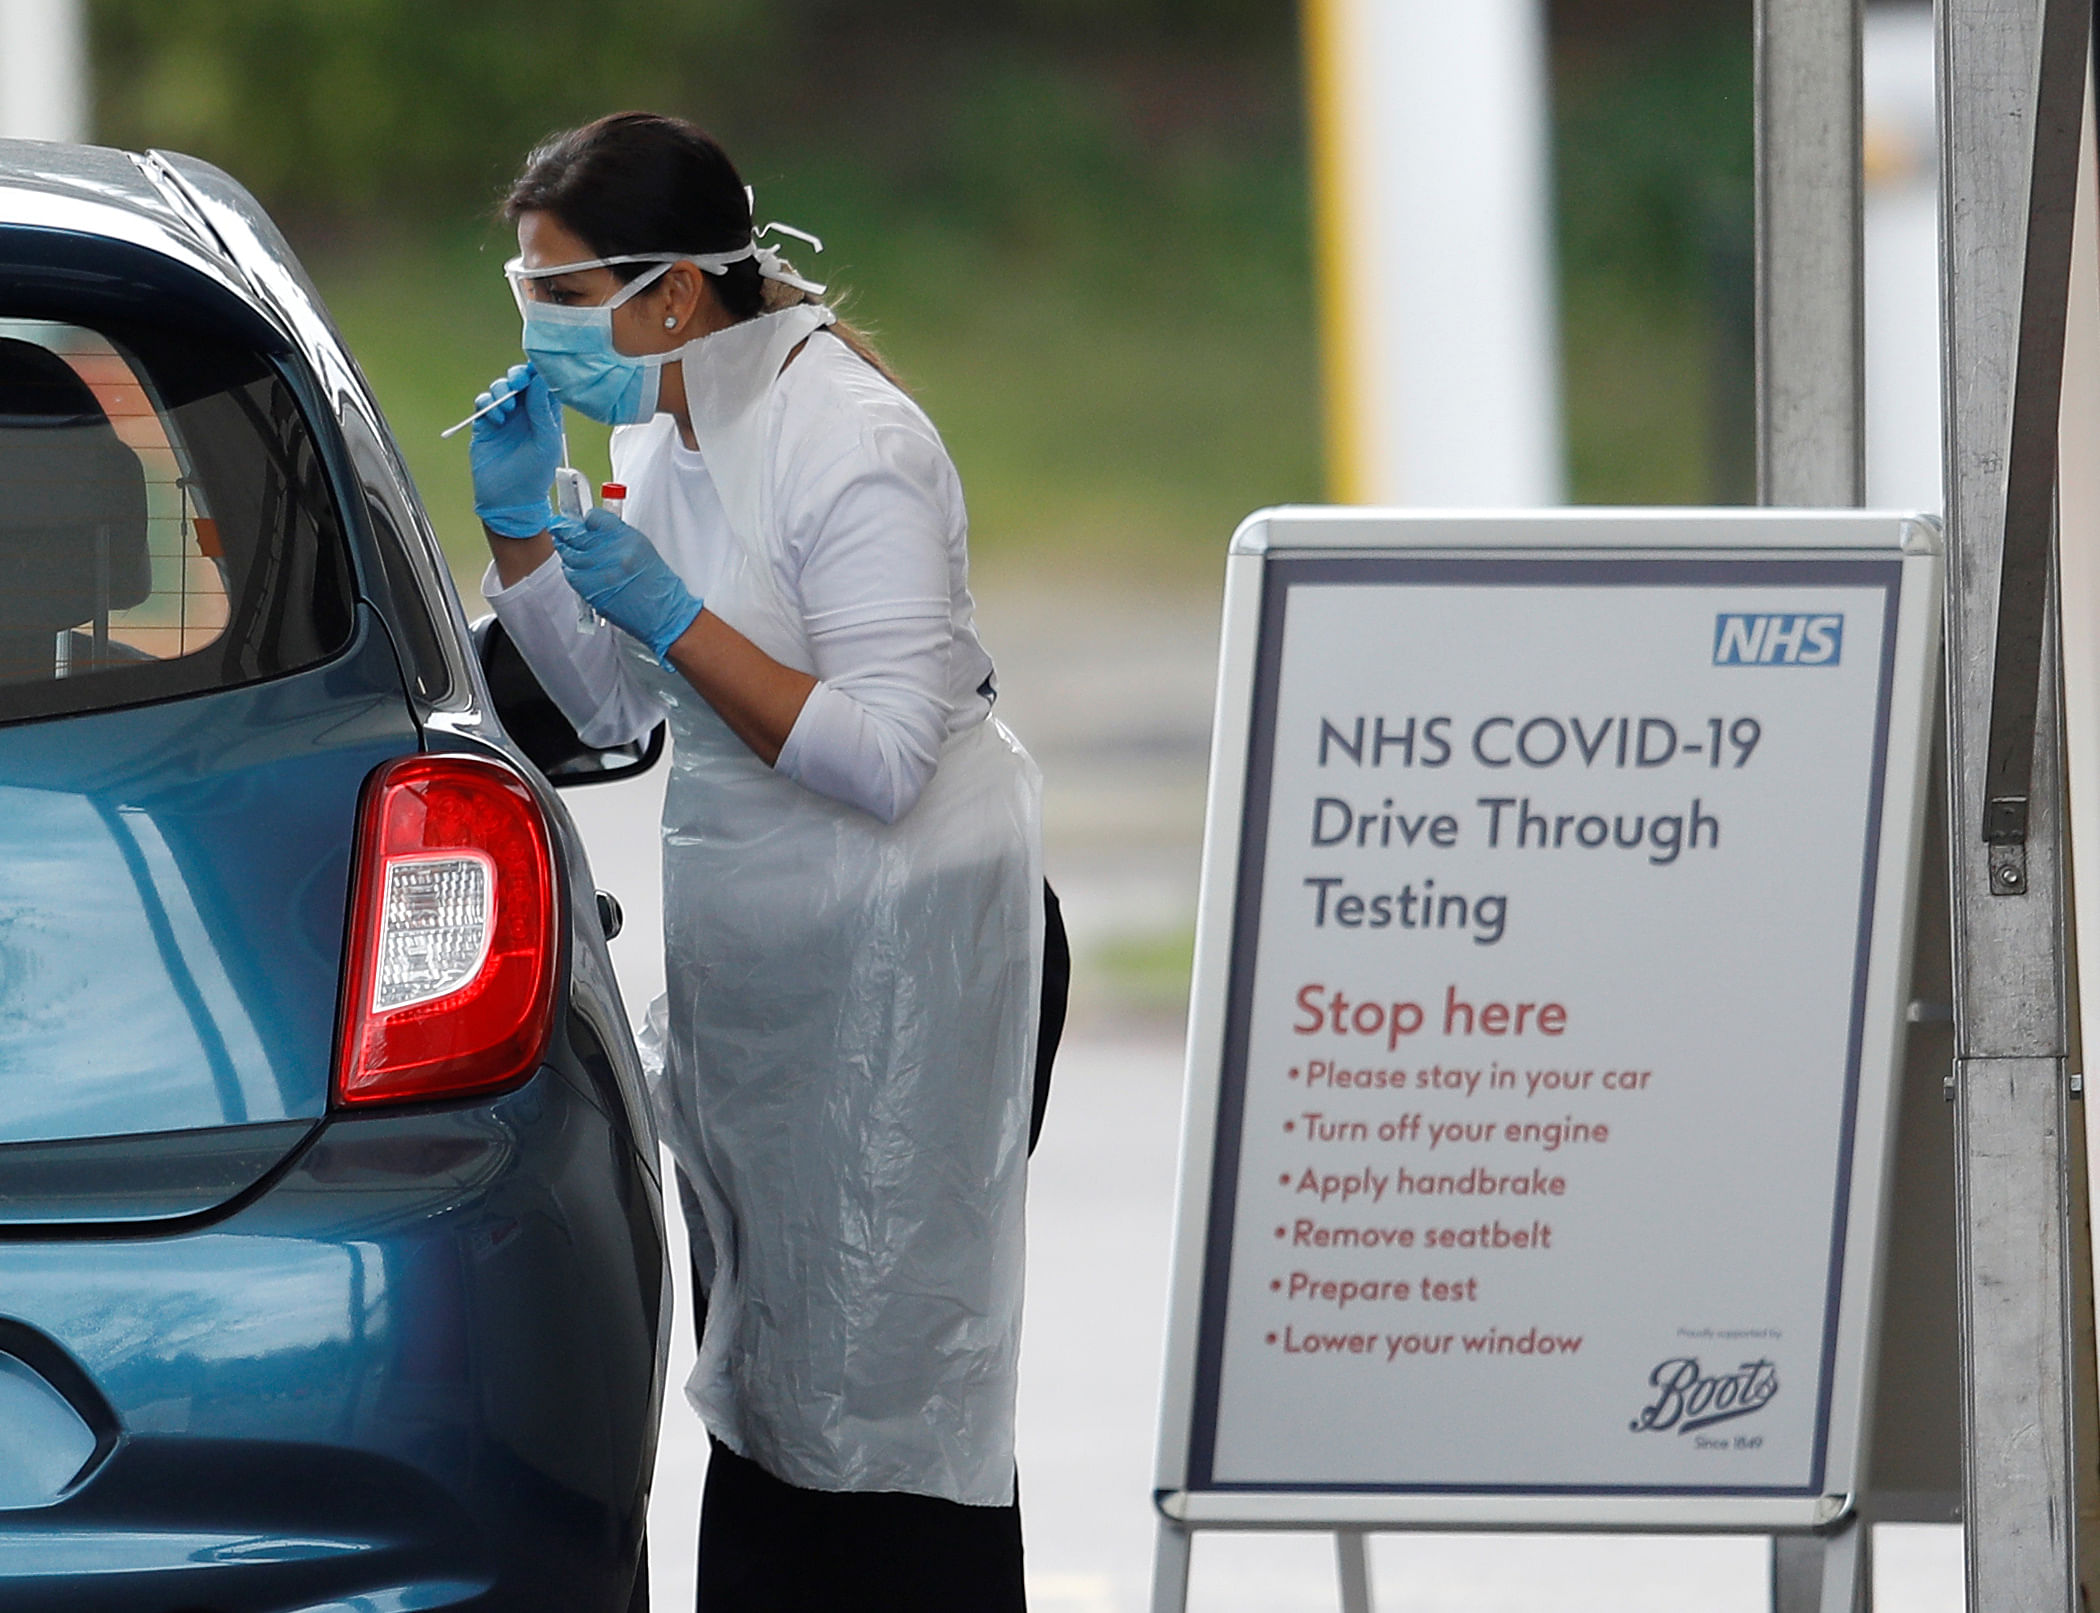 Medical staff at an NHS drive through coronavirus disease (COVID-19) testing facility in the car park of Chessington World of Adventures, as the spread of the coronavirus disease (COVID-19) continues. (Credit: Reuters)